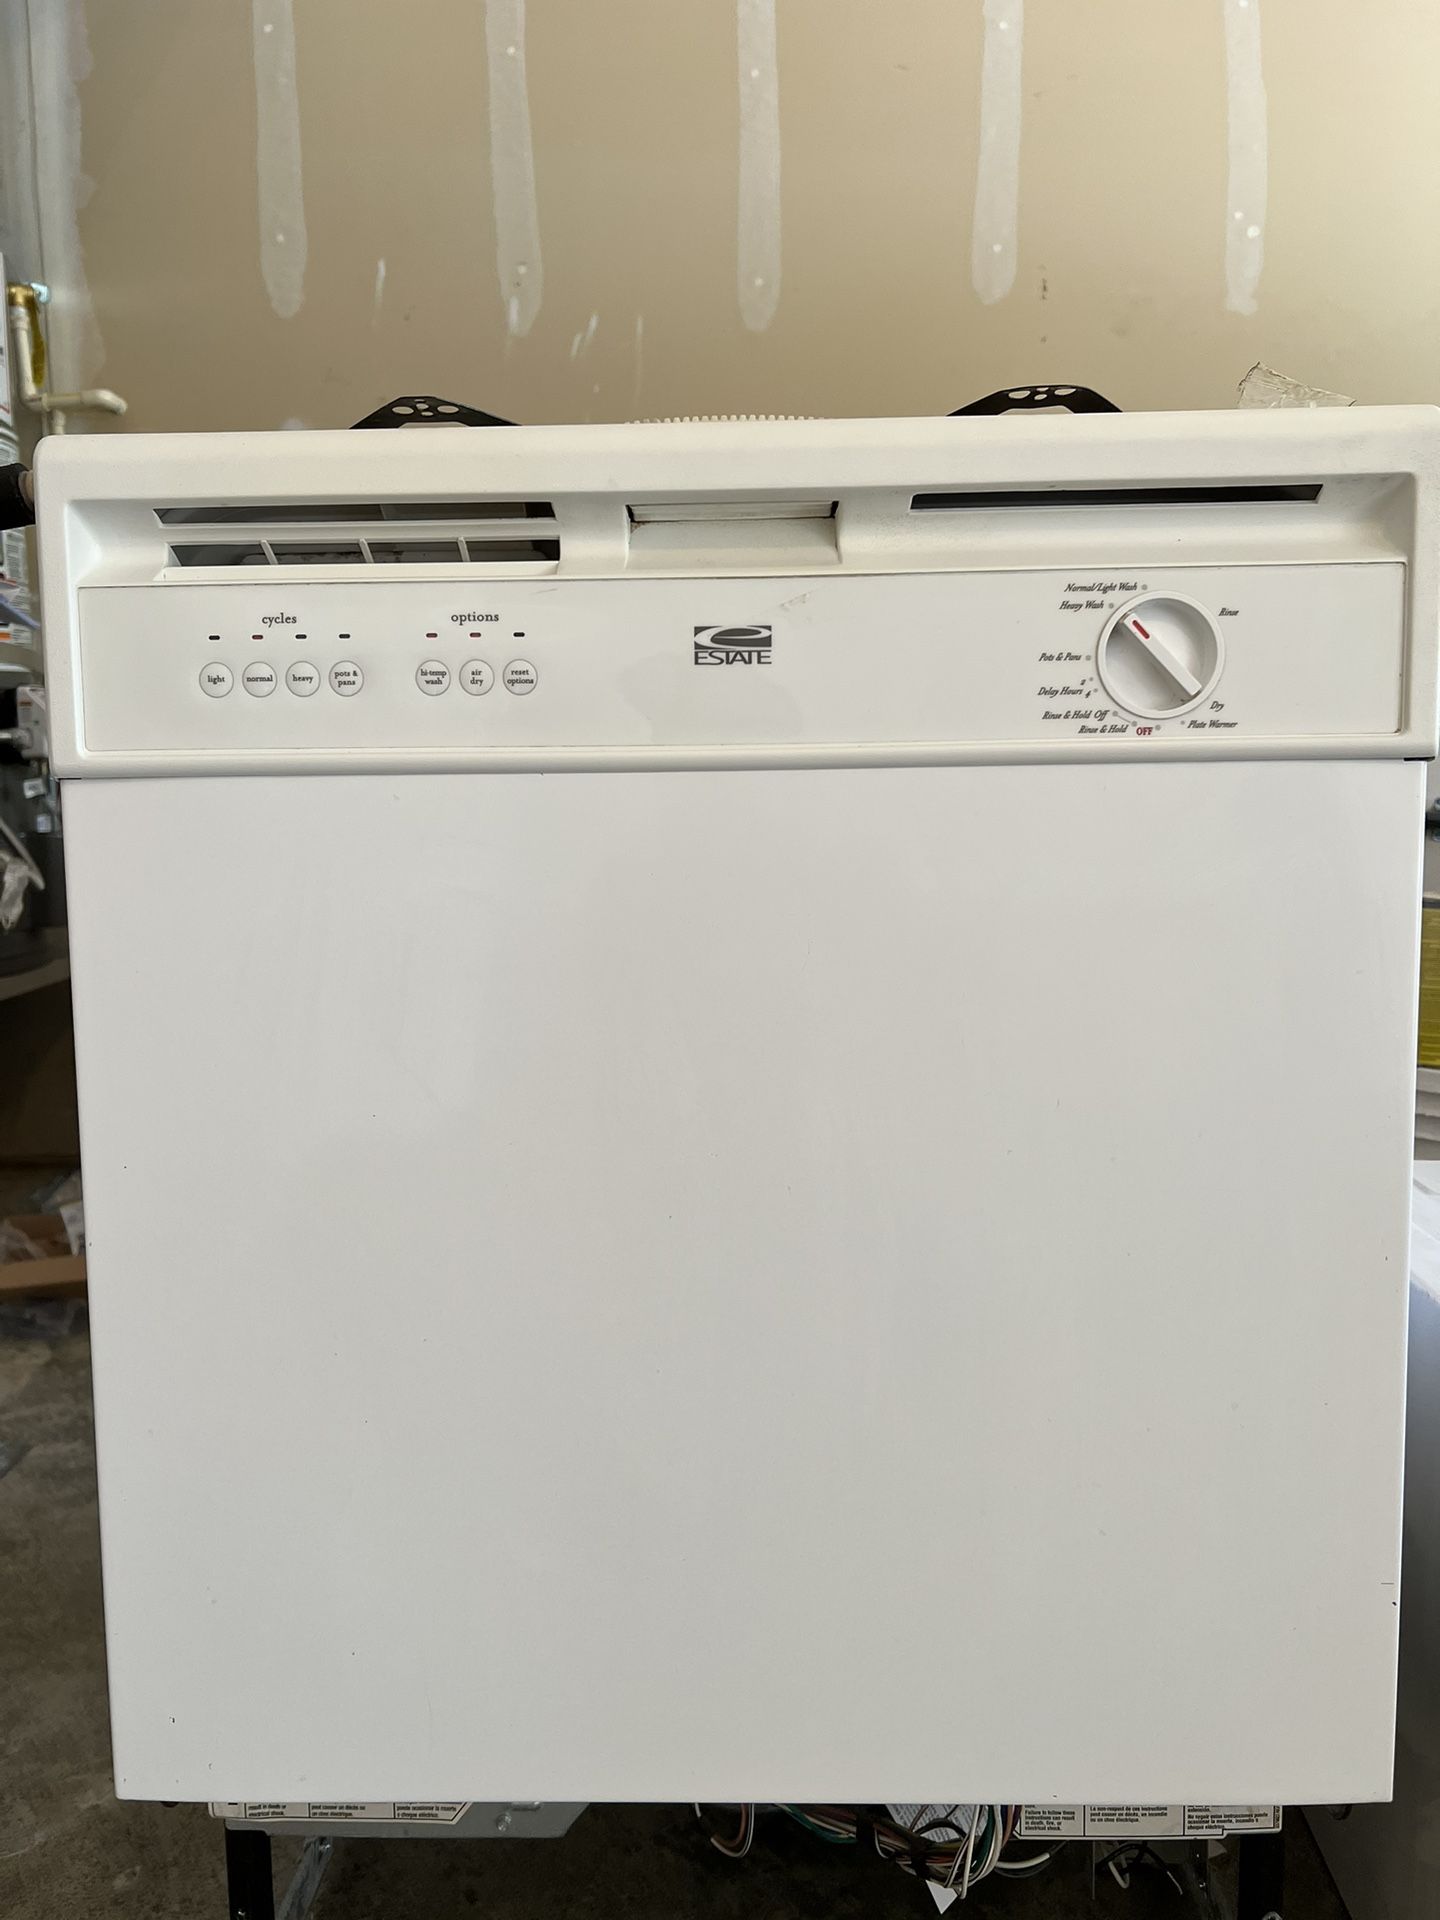 Estate Dishwasher For Sell - Good Condition